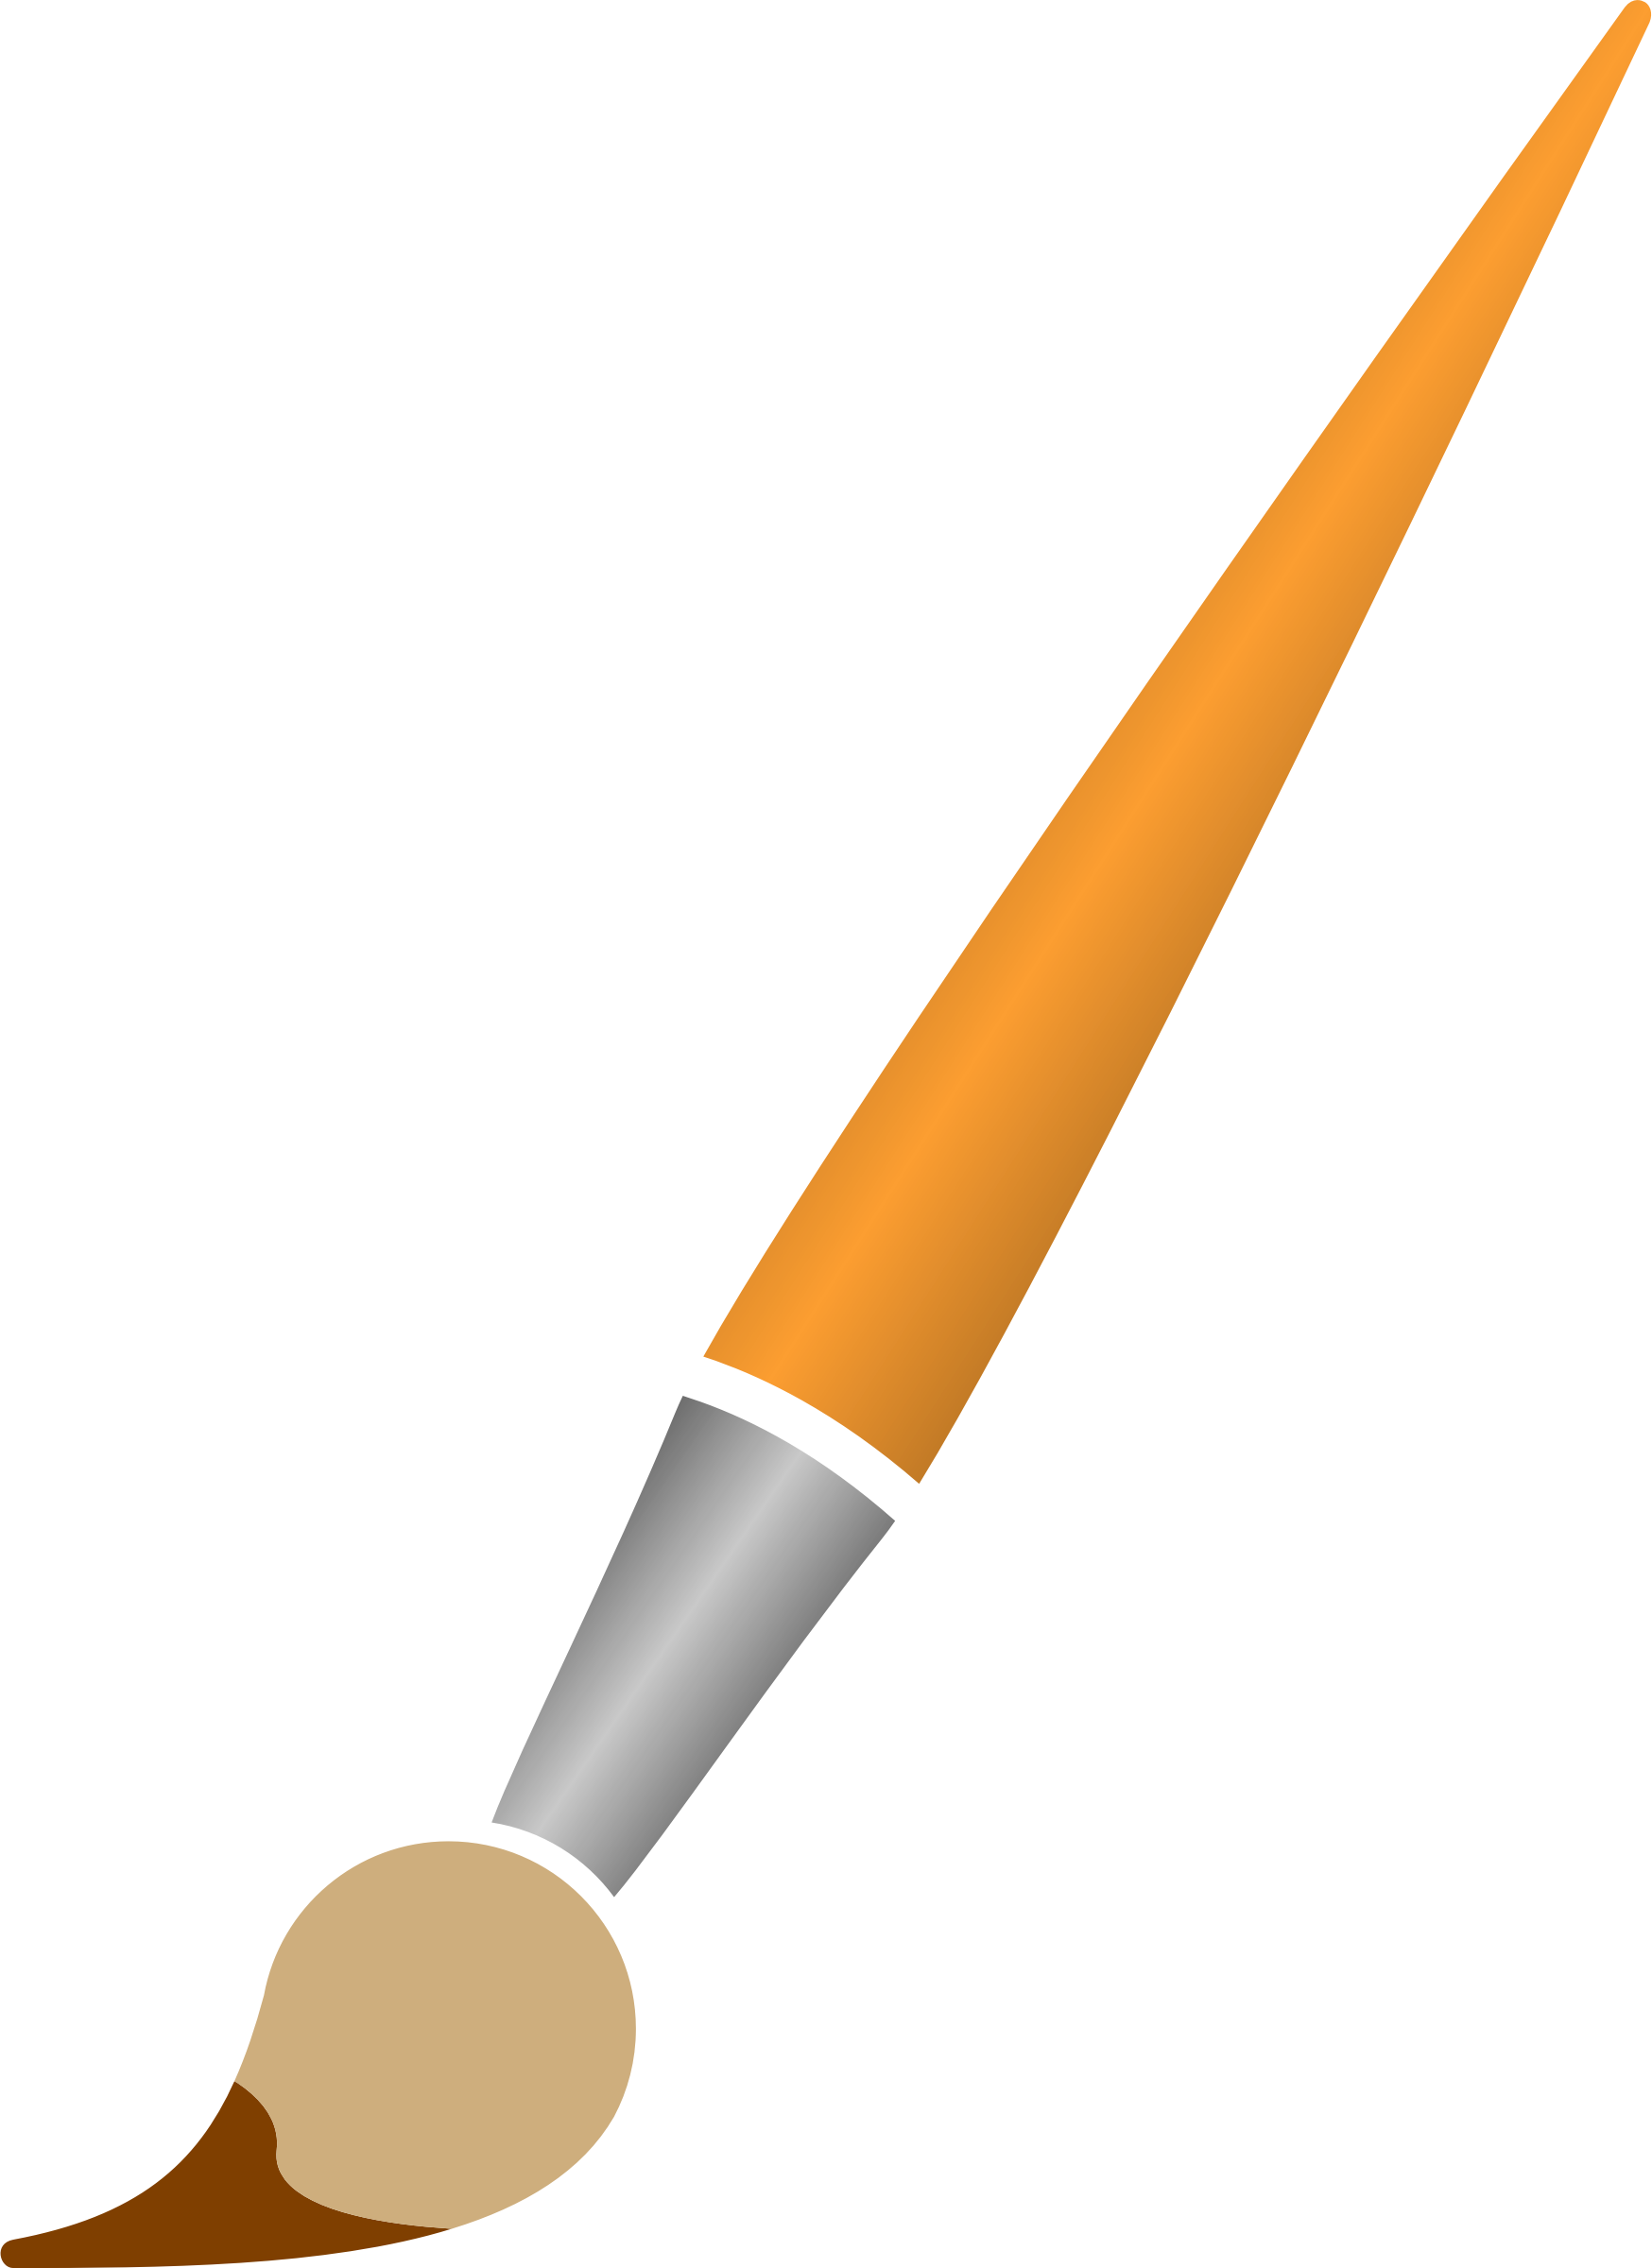 Paint Brush With Brown Dye - Paint Brush Clipart Png (1748x2400)